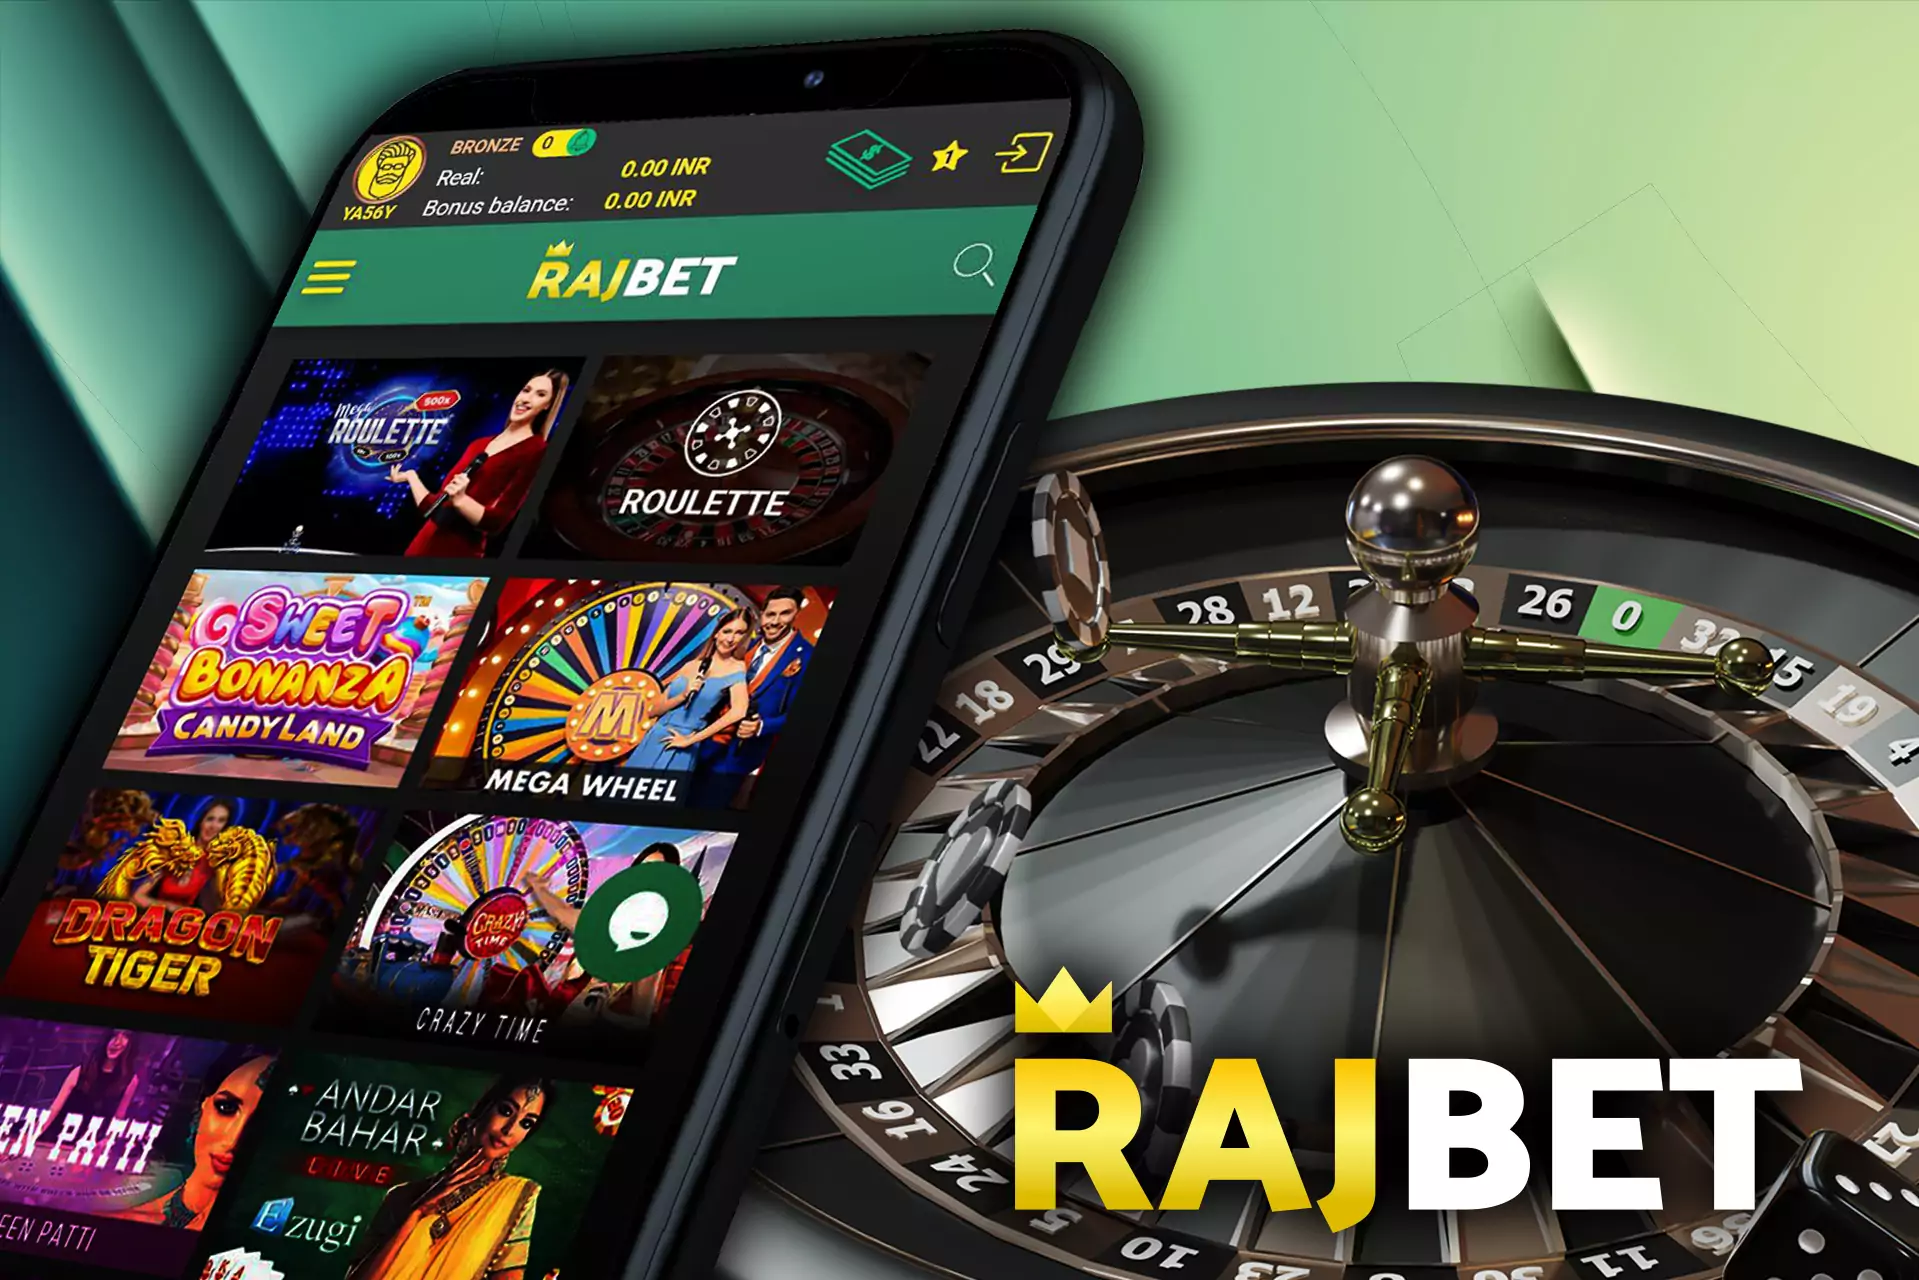 The Rajbet app has an online casino available.